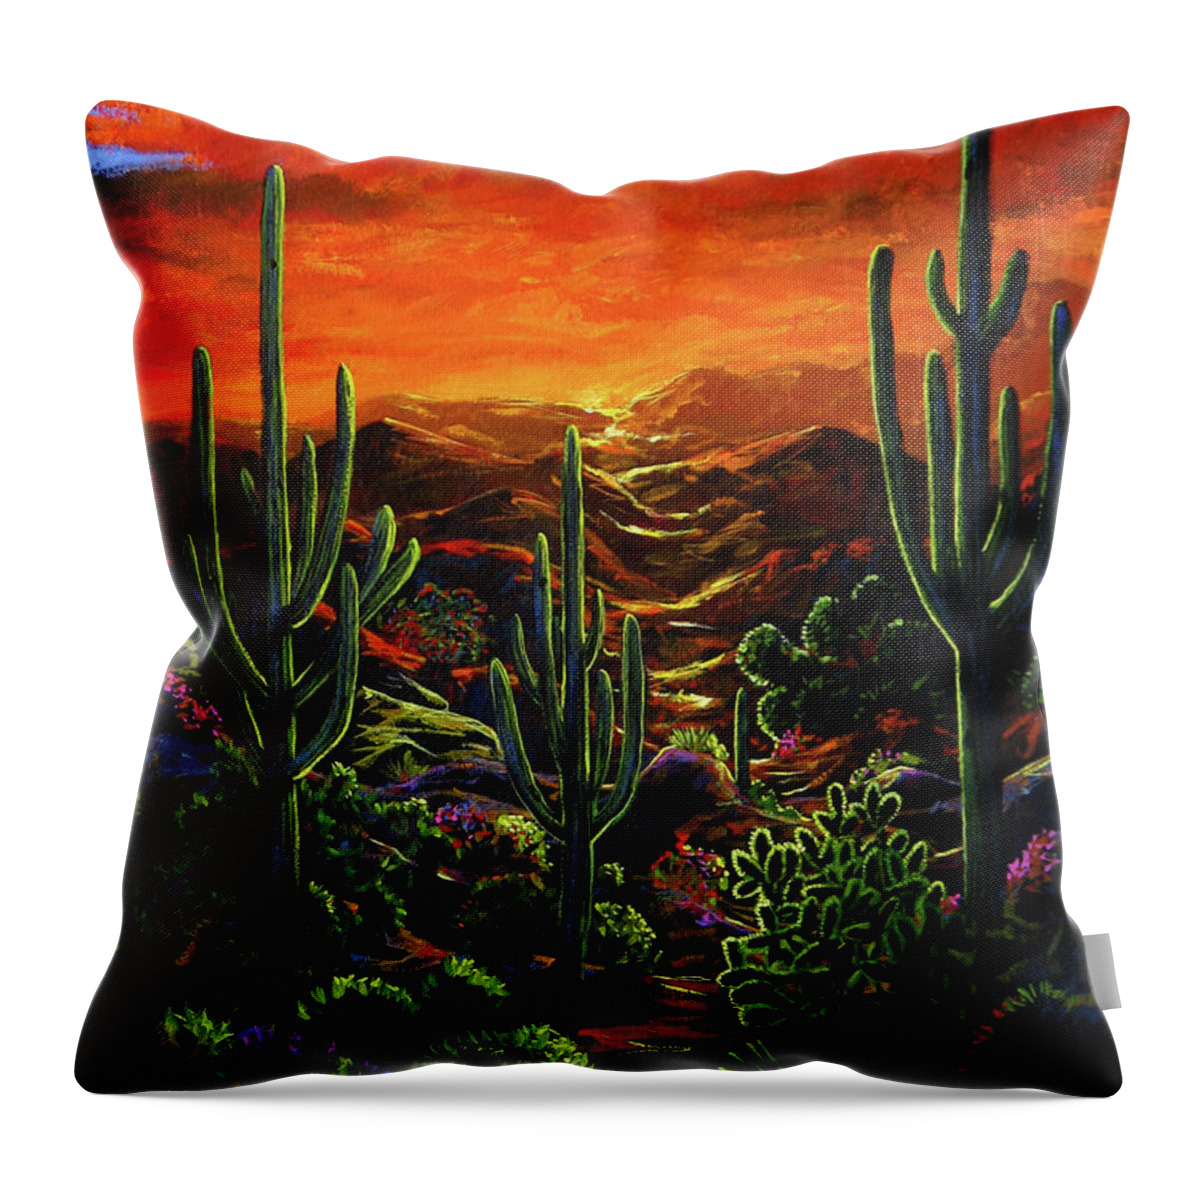 Sunset Throw Pillow featuring the painting Desert Sunset by Lance Headlee